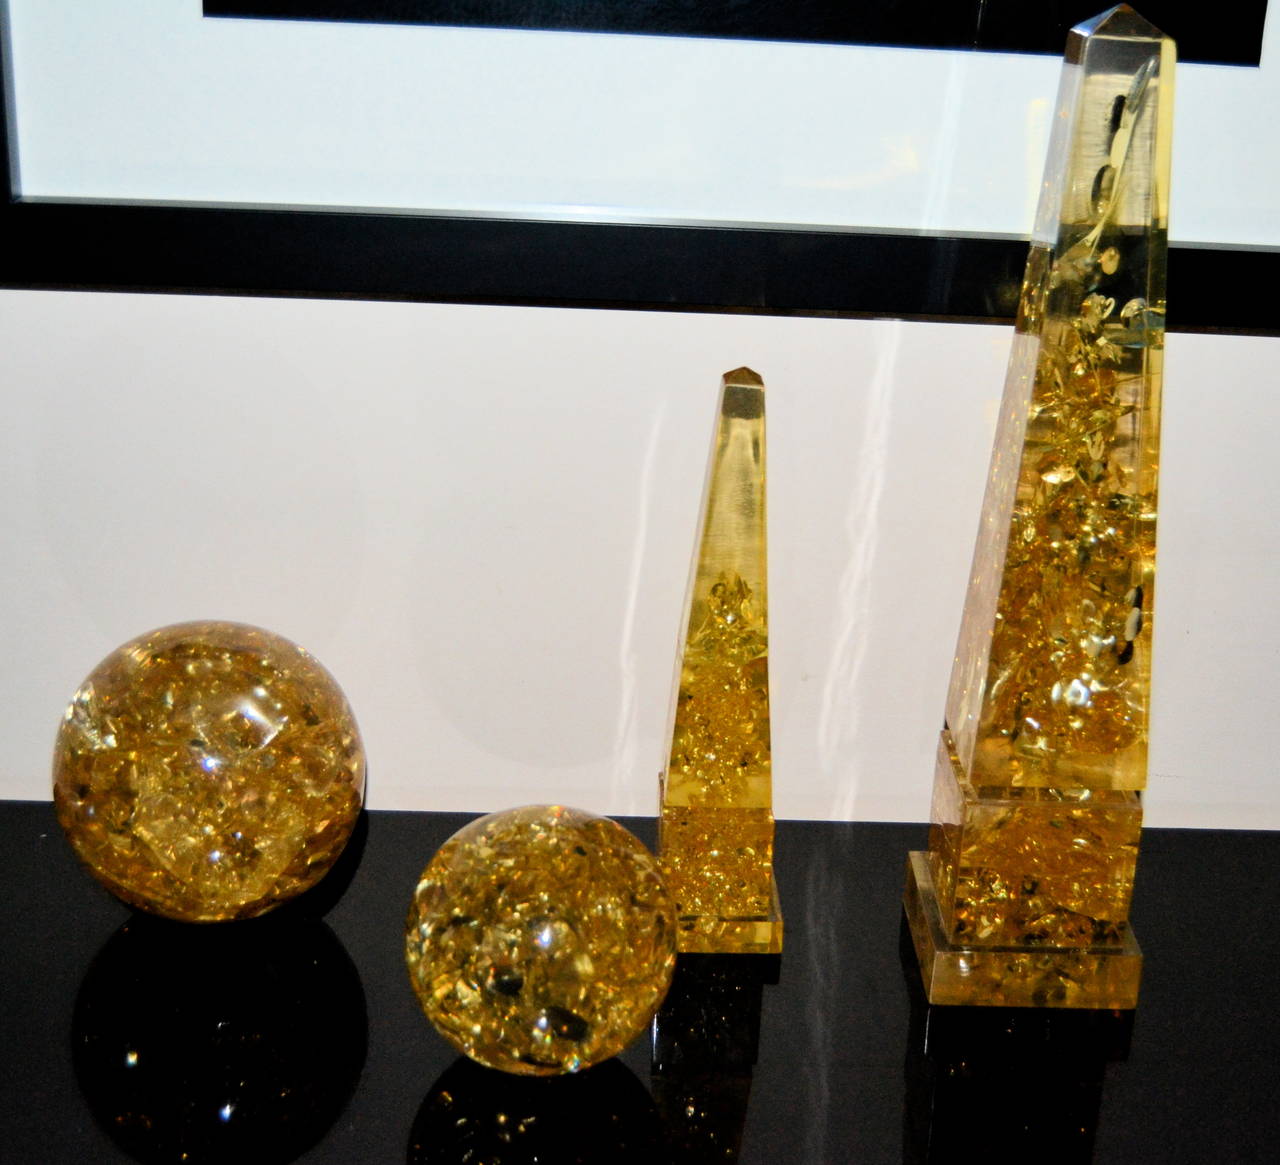 Set of 1970s resin objects composed by two spheres and two obelisk created by Marie-Claude de Fouquieres. Great condition and elegant pieces for decorate.

Big obelisK: 54cm x 12cm x 12cm.
Mid obelisk: 33cm x 8cm x 8cm.
Big sphere: 20cm.
Mid